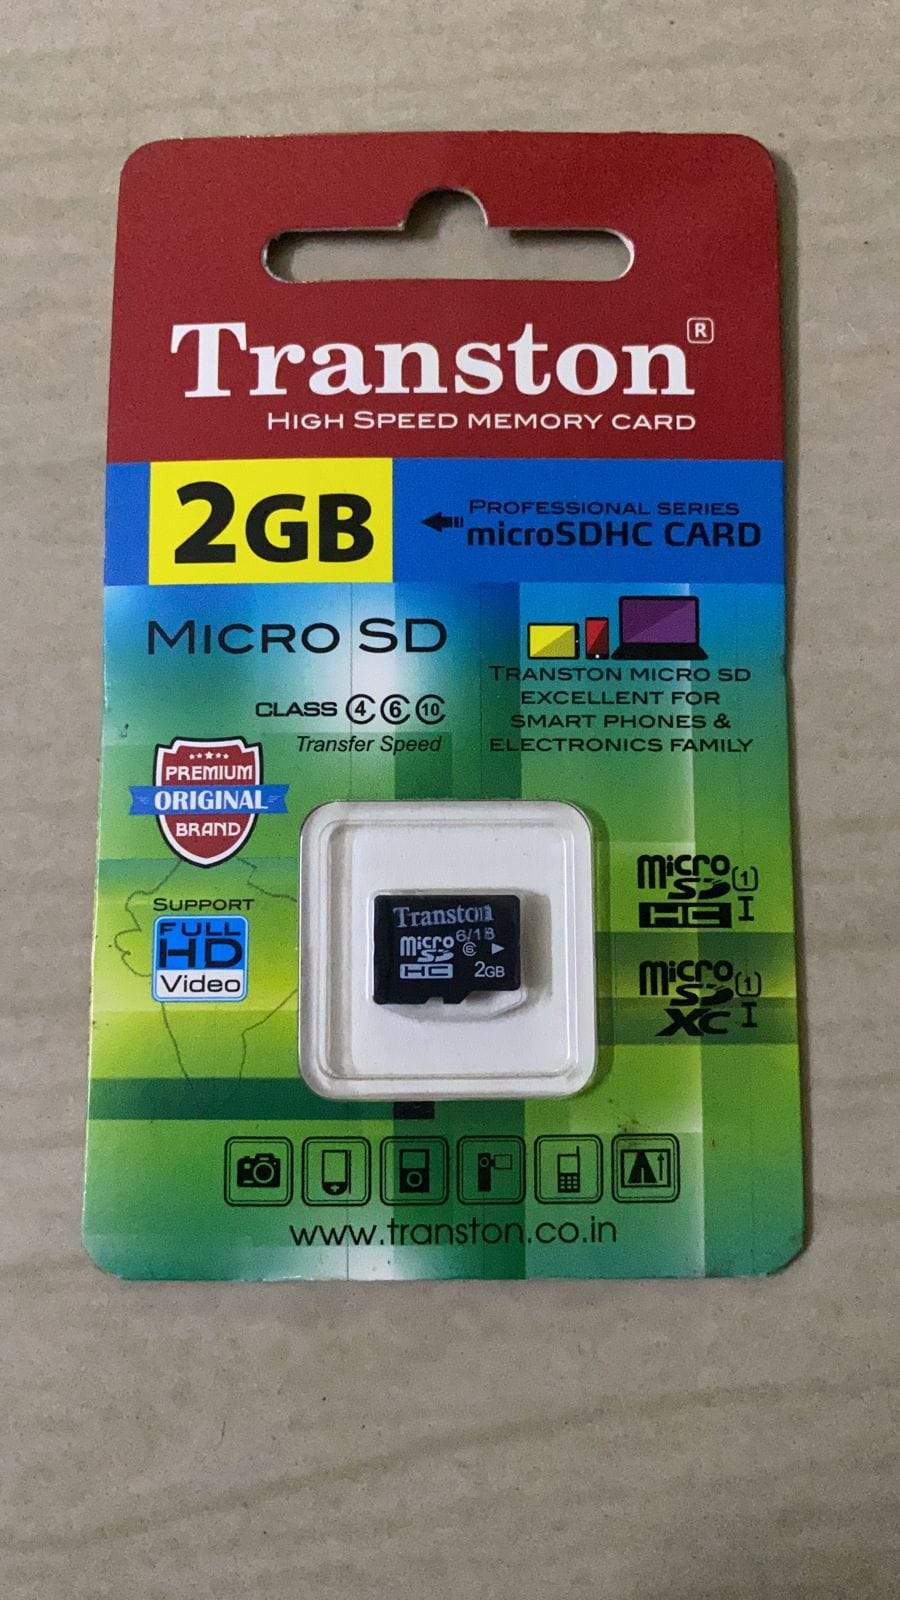 Transton 2GB Micro SD cards with good quality-Memory Cards-dealsplant